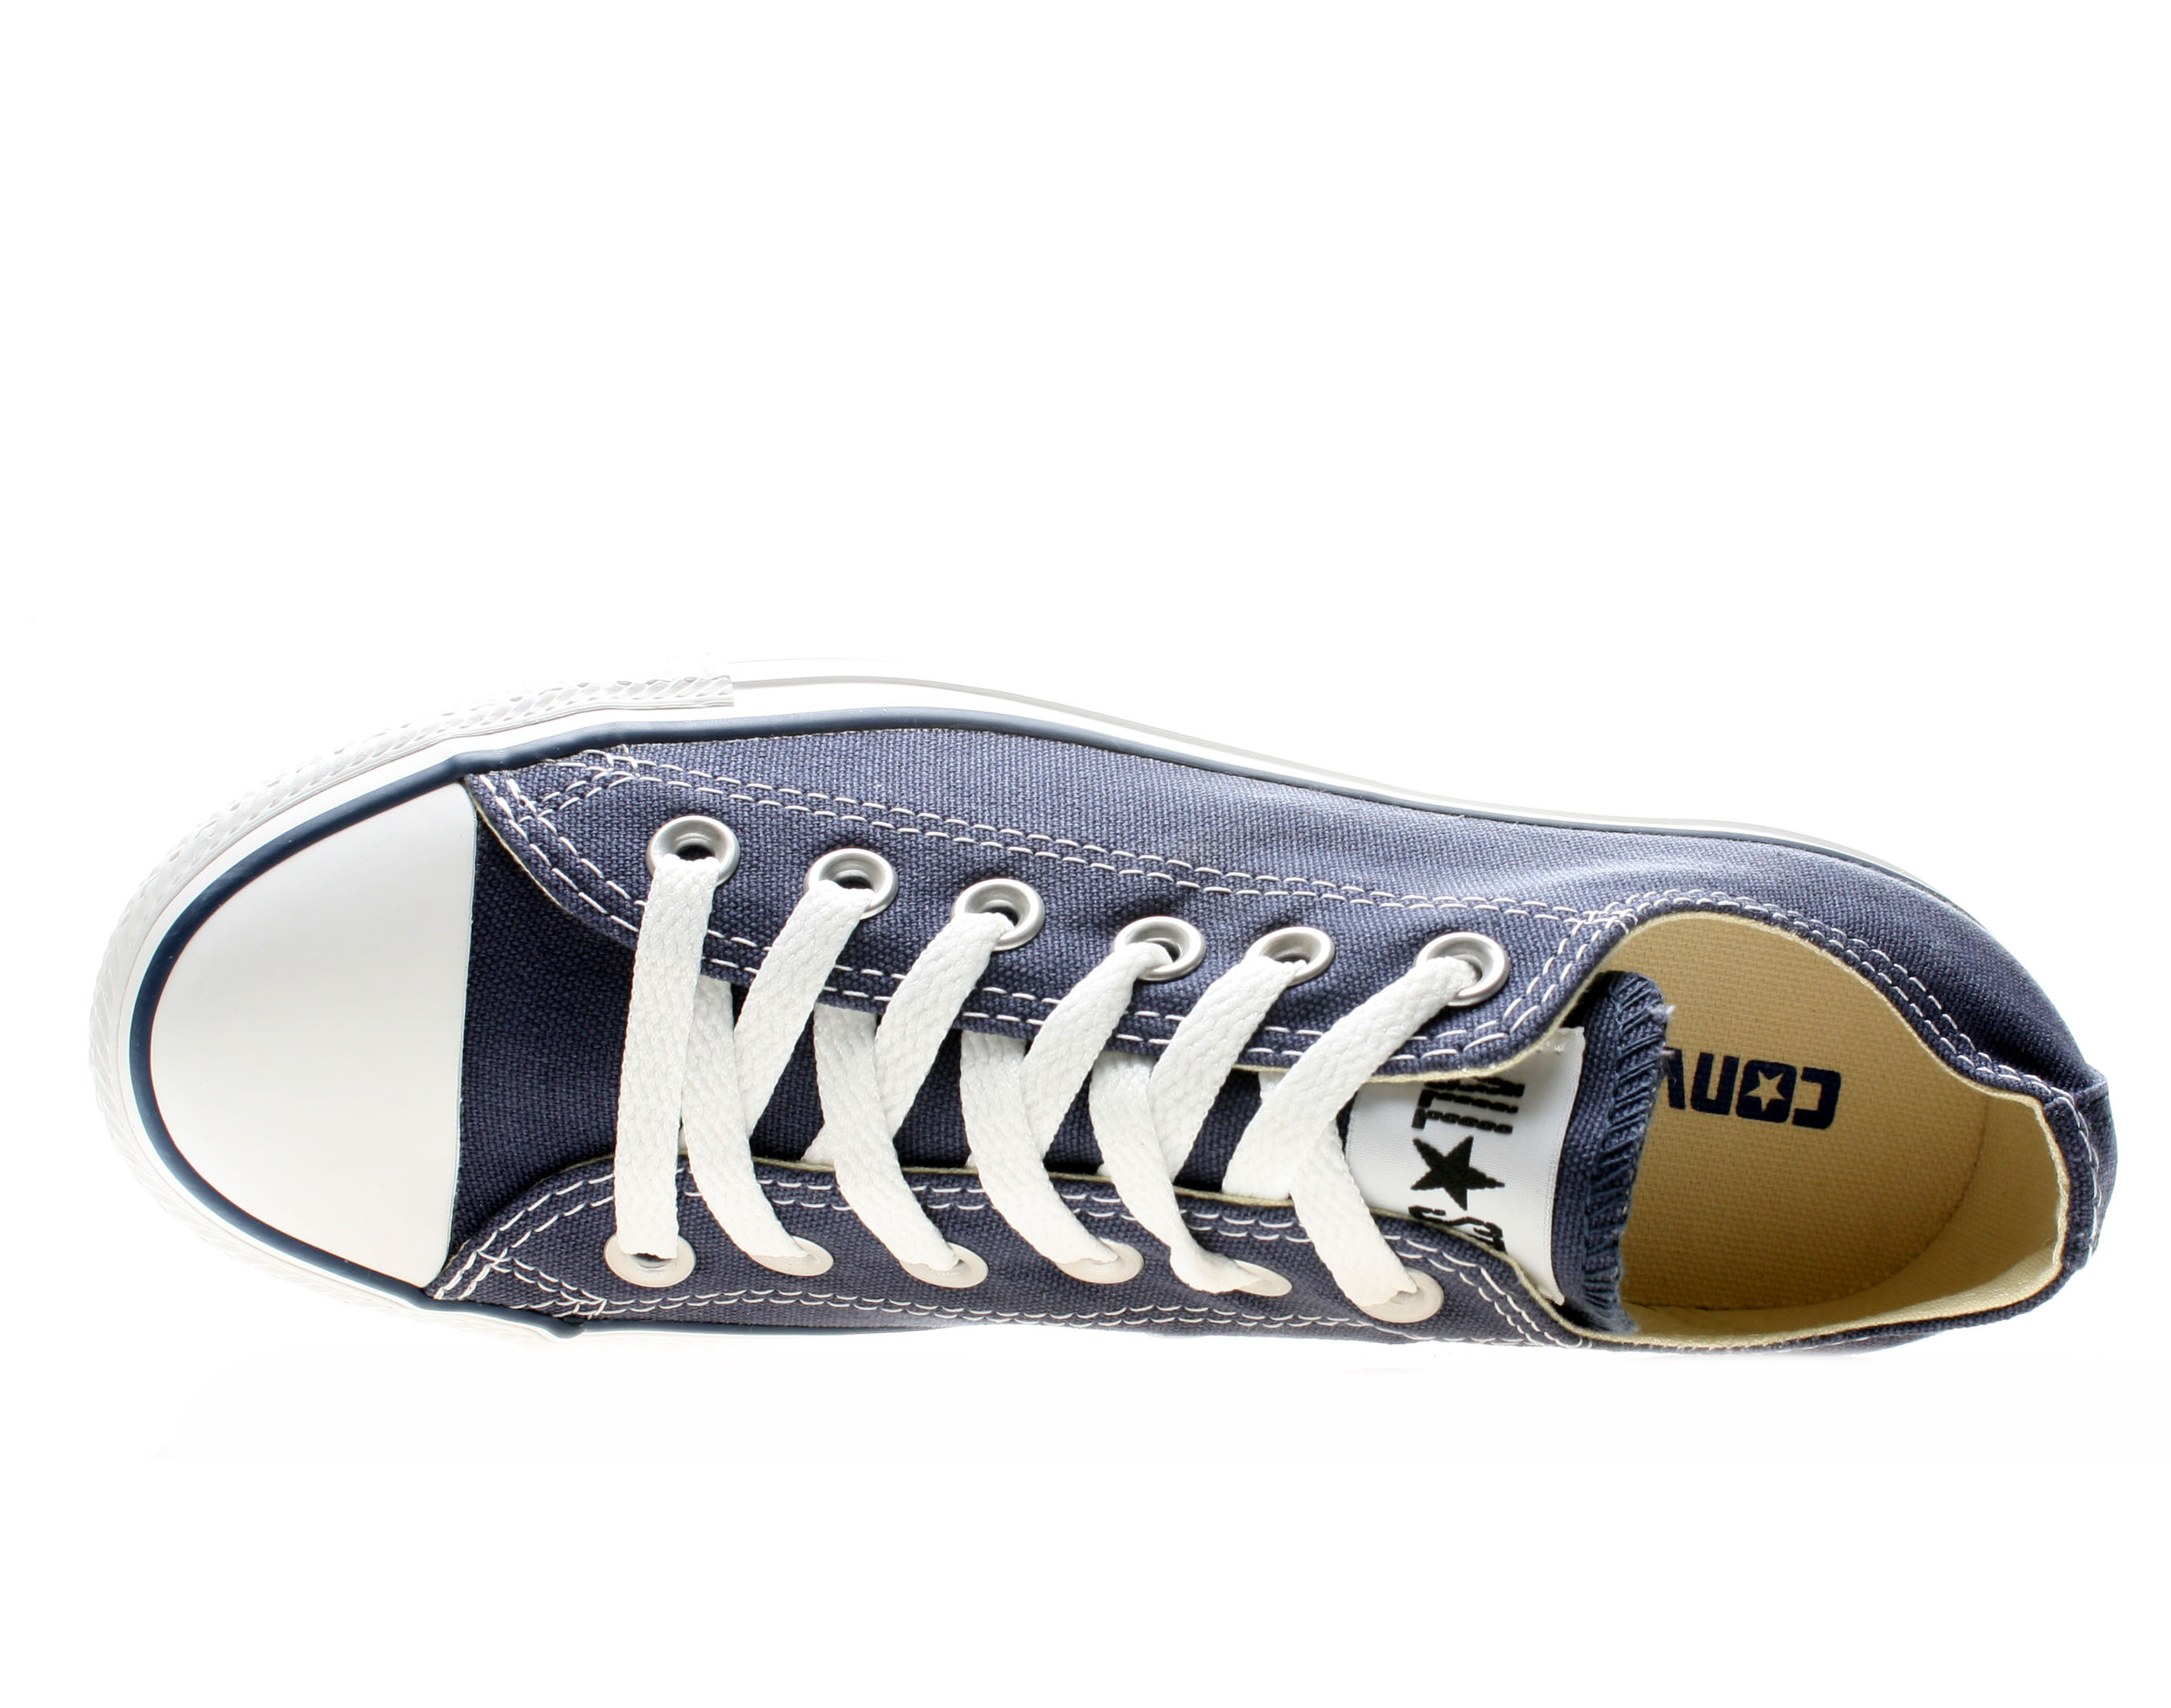 CONVERSE ALL STAR CHUCK TAYLOR LOW MEN'S NAVY M9697 - image 4 of 6